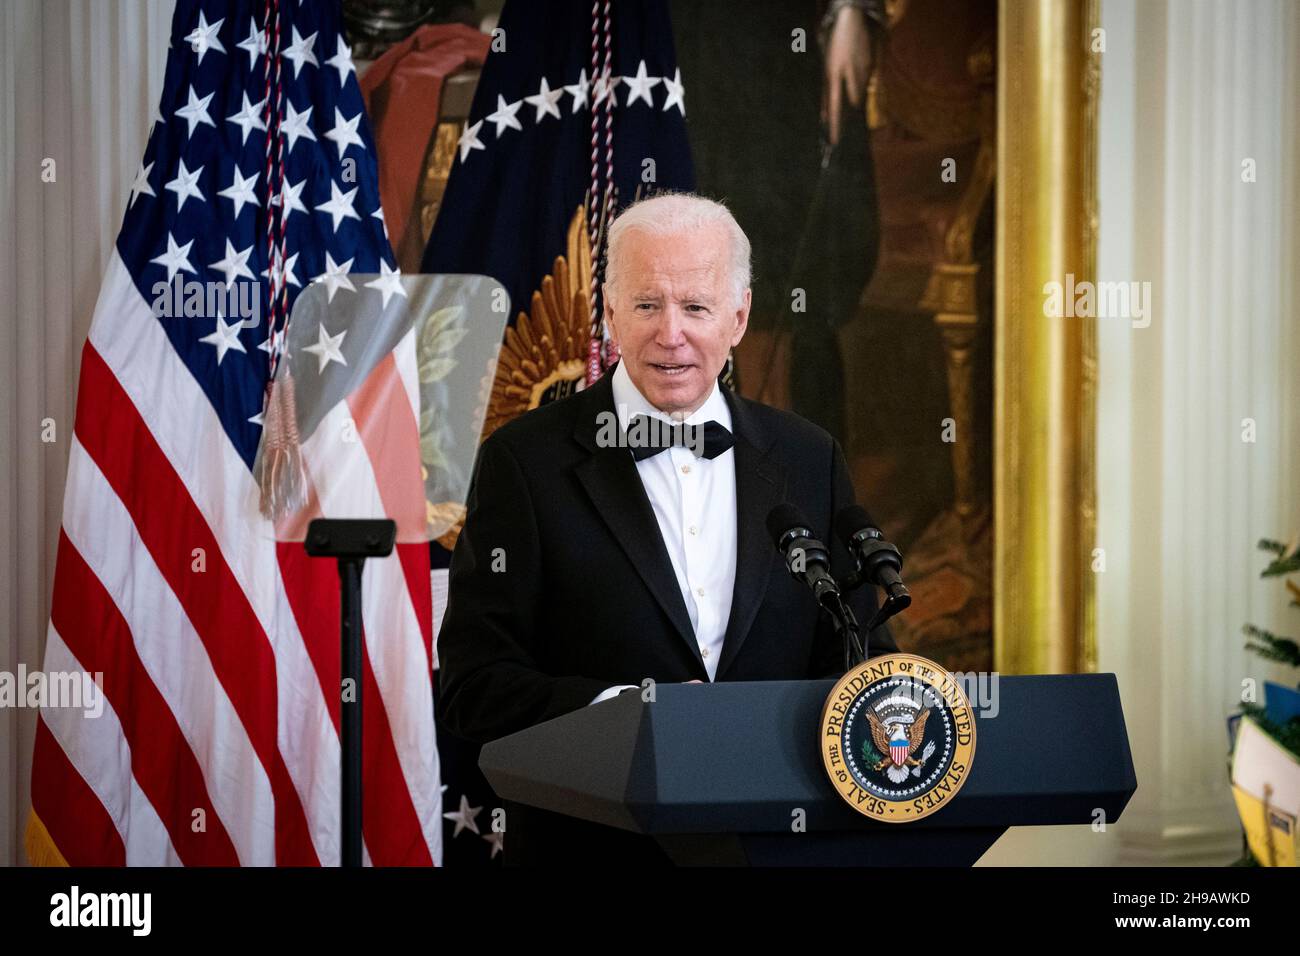 Washington, DC, U.S., on Sunday, Dec. 5, 2021. U.S. President Joe Biden speaks during the Kennedy Center Honorees Reception in the East Room of the White House in Washington, DC, U.S., on Sunday, Dec. 5, 2021. The John F. Kennedy Center for the Performing Arts 44th Honorees for lifetime artistic achievements include operatic bass-baritone Justino Diaz, Motown founder Berry Gordy, Saturday Night Live creator Lorne Michaels, actress Bette Midler, and singer-songwriter Joni Mitchell. Credit: Al Drago/Pool via CNP /MediaPunch Stock Photo